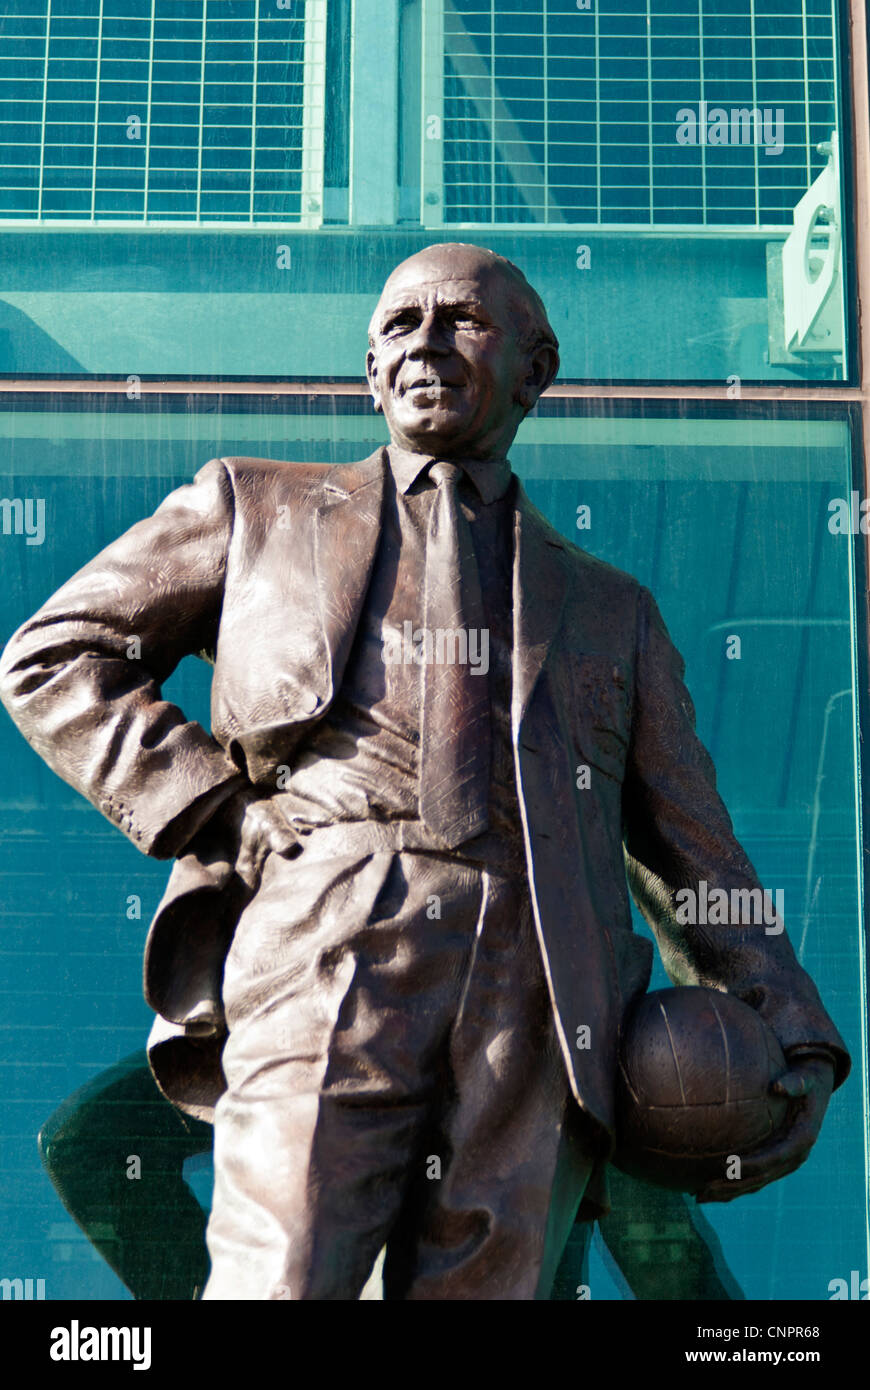 Statue of Sir Matt Busby outside Manchester United football ground, Old Trafford, Manchester, England, UK Stock Photo